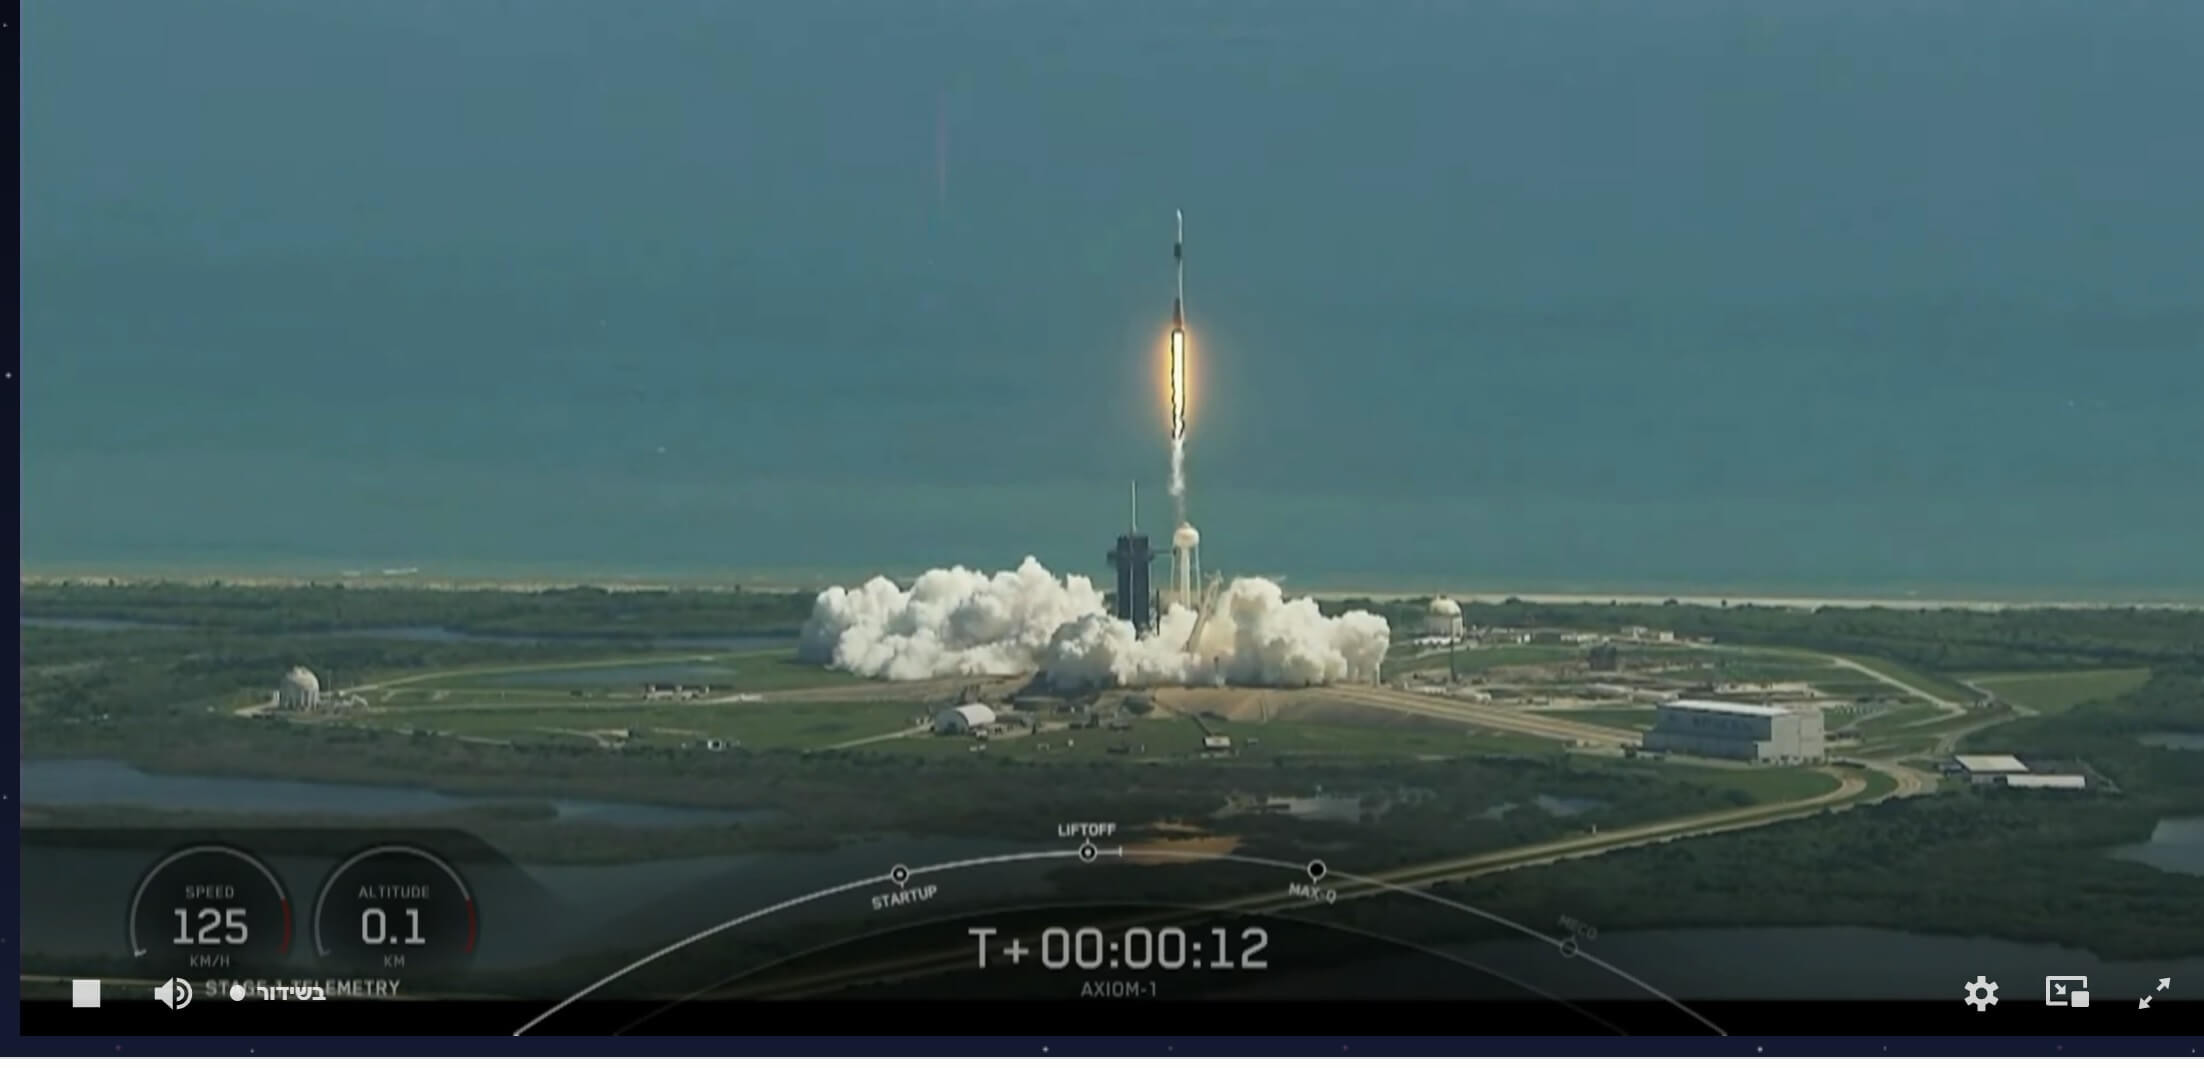 The launch of the Endeavor crew Dragon spacecraft on a Falcon 9 launcher for the AX-1 private mission in which the Israeli Eitan Stiva also participated. Screenshot from Axiom's broadcast. The space companies are subject to the laws of the countries in which they operate.